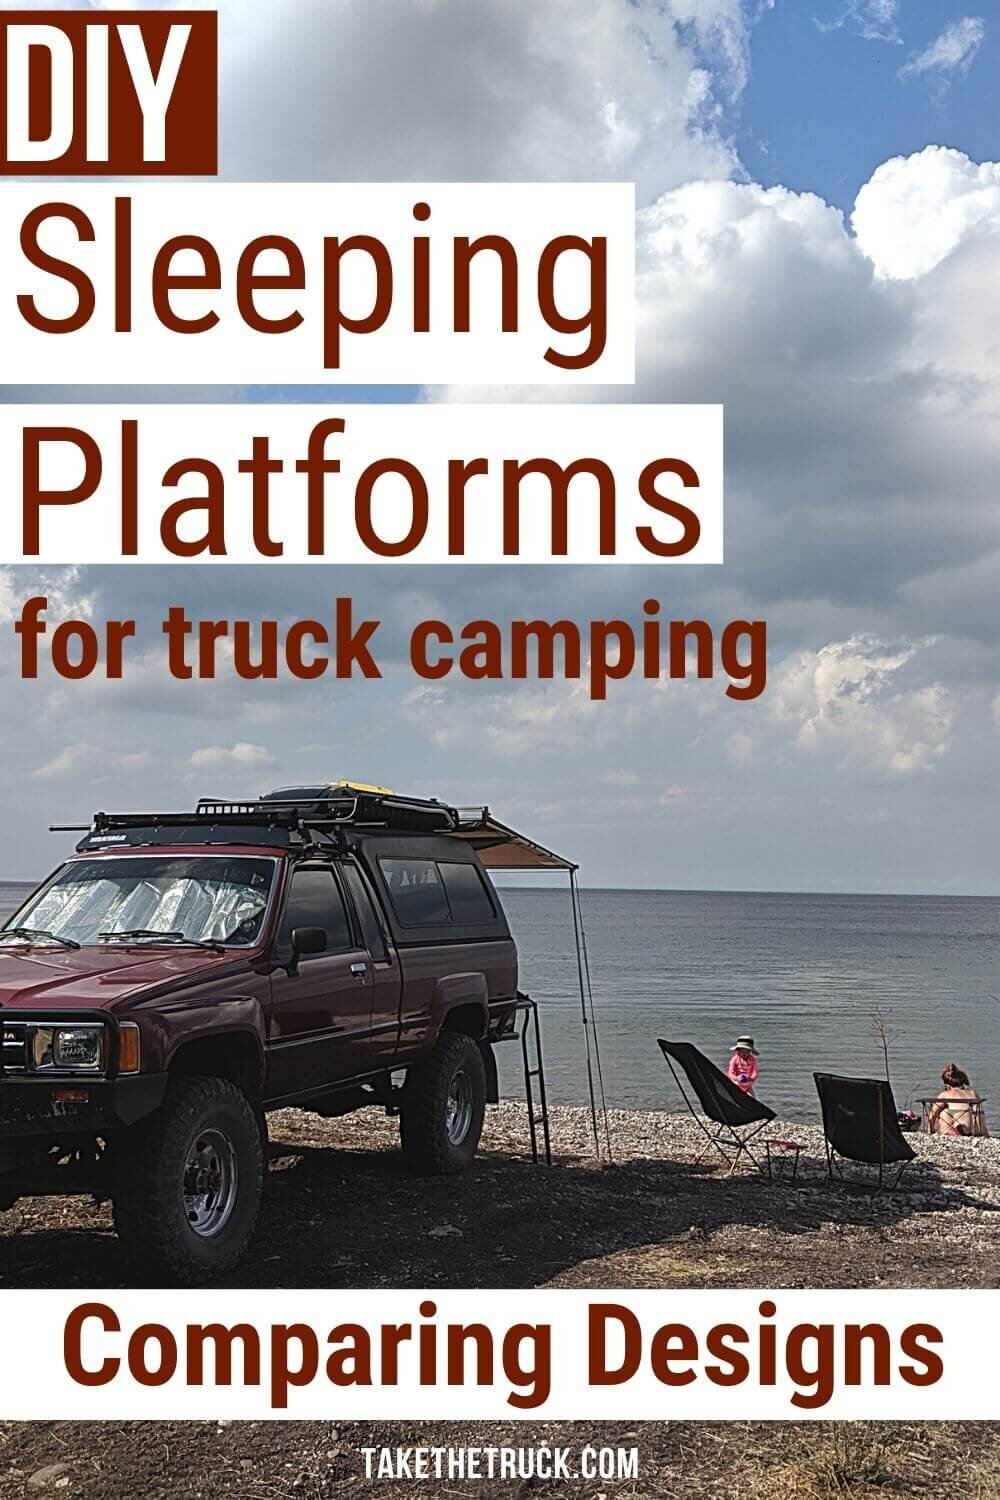 Guide and Tips for choosing a DIY sleeping platform for truck bed camping.